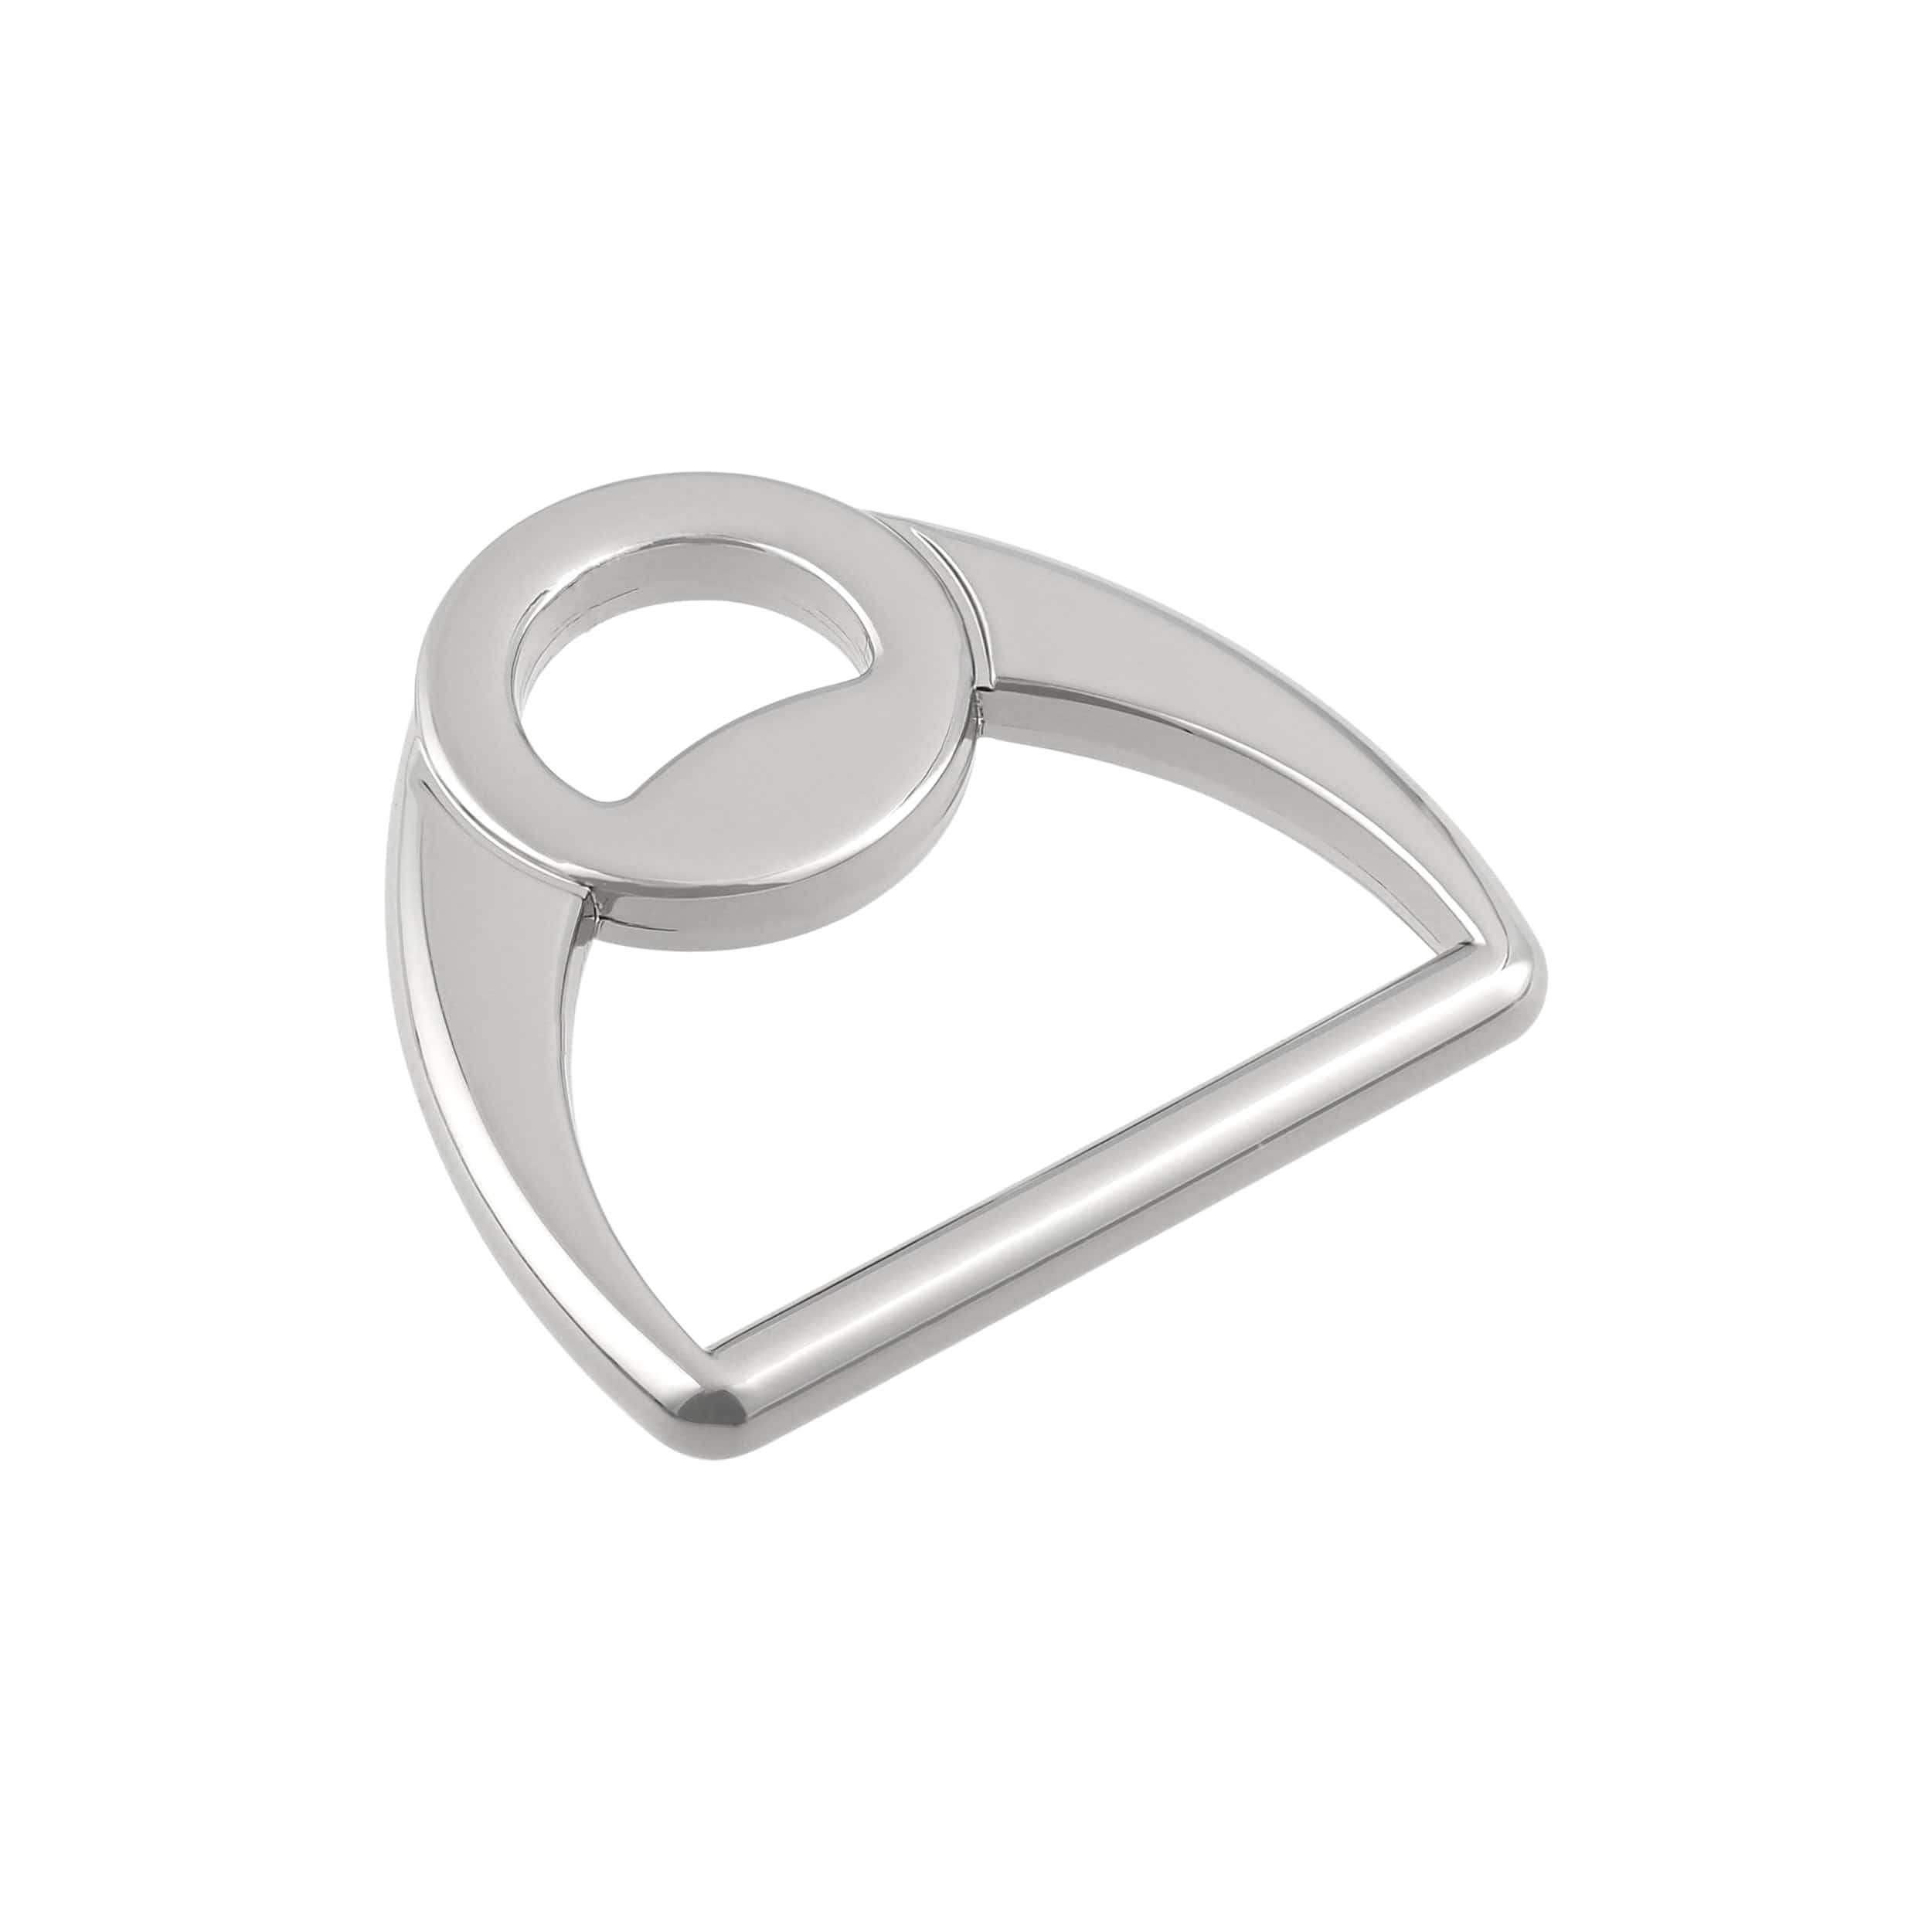 Metal D Ring Buckle D-Ring Loop Webbing Buckle Rainbow Semi-Circular D Ring  for Bags Purse Clothes Keychains Belts Sewing - Walmart.com